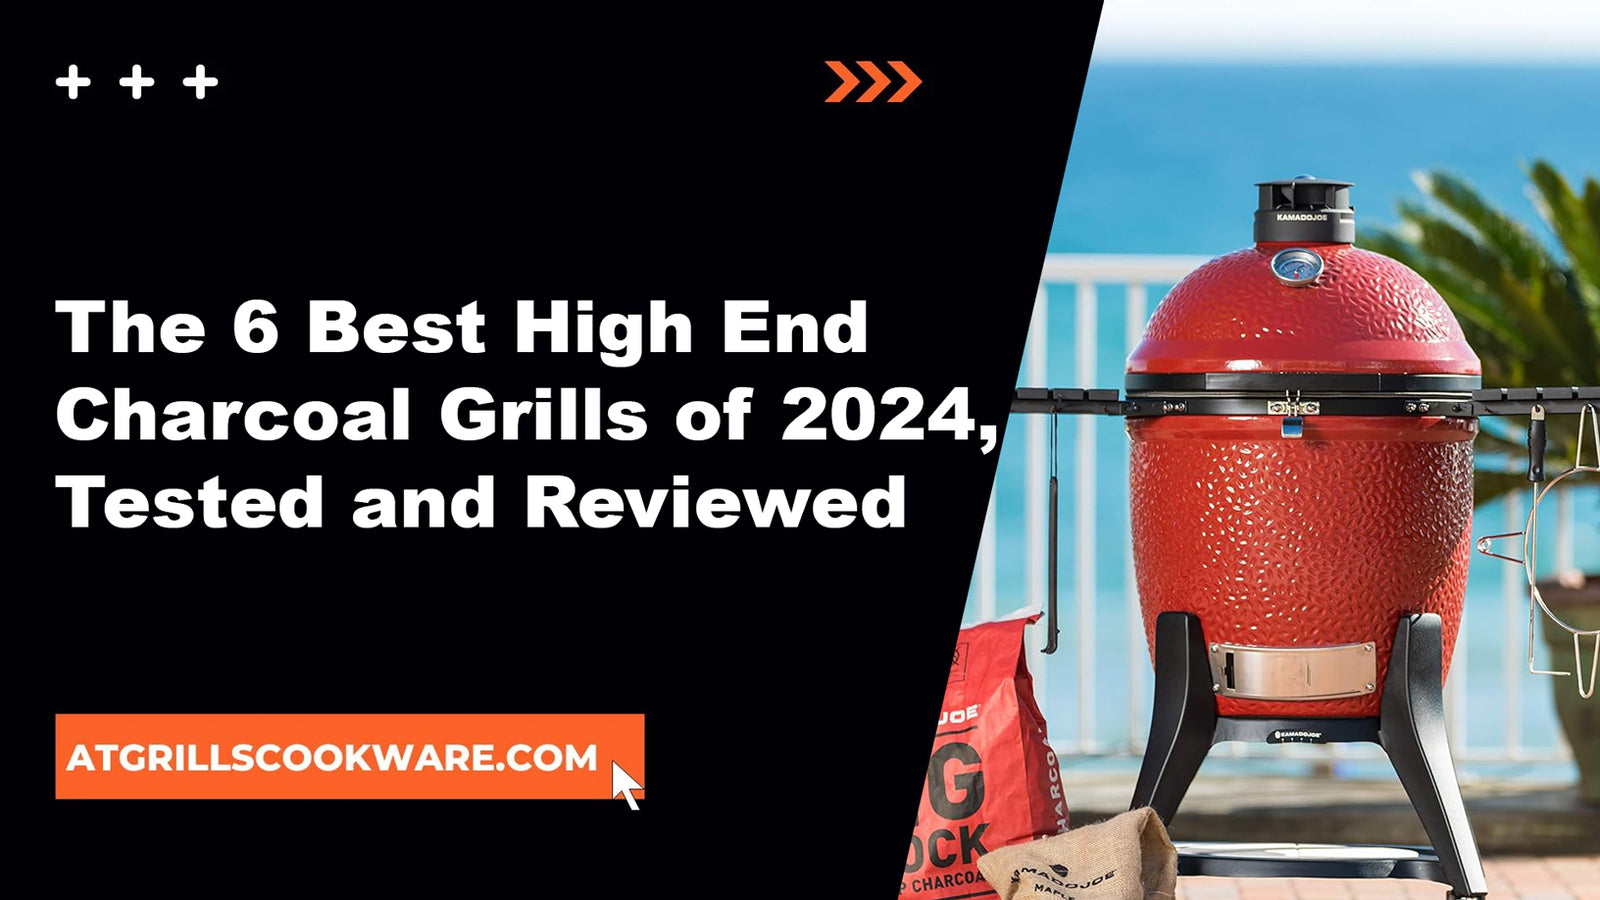 The 6 Best HighEnd Charcoal Grills of 2024, Tested and Reviewed ATGRILLS